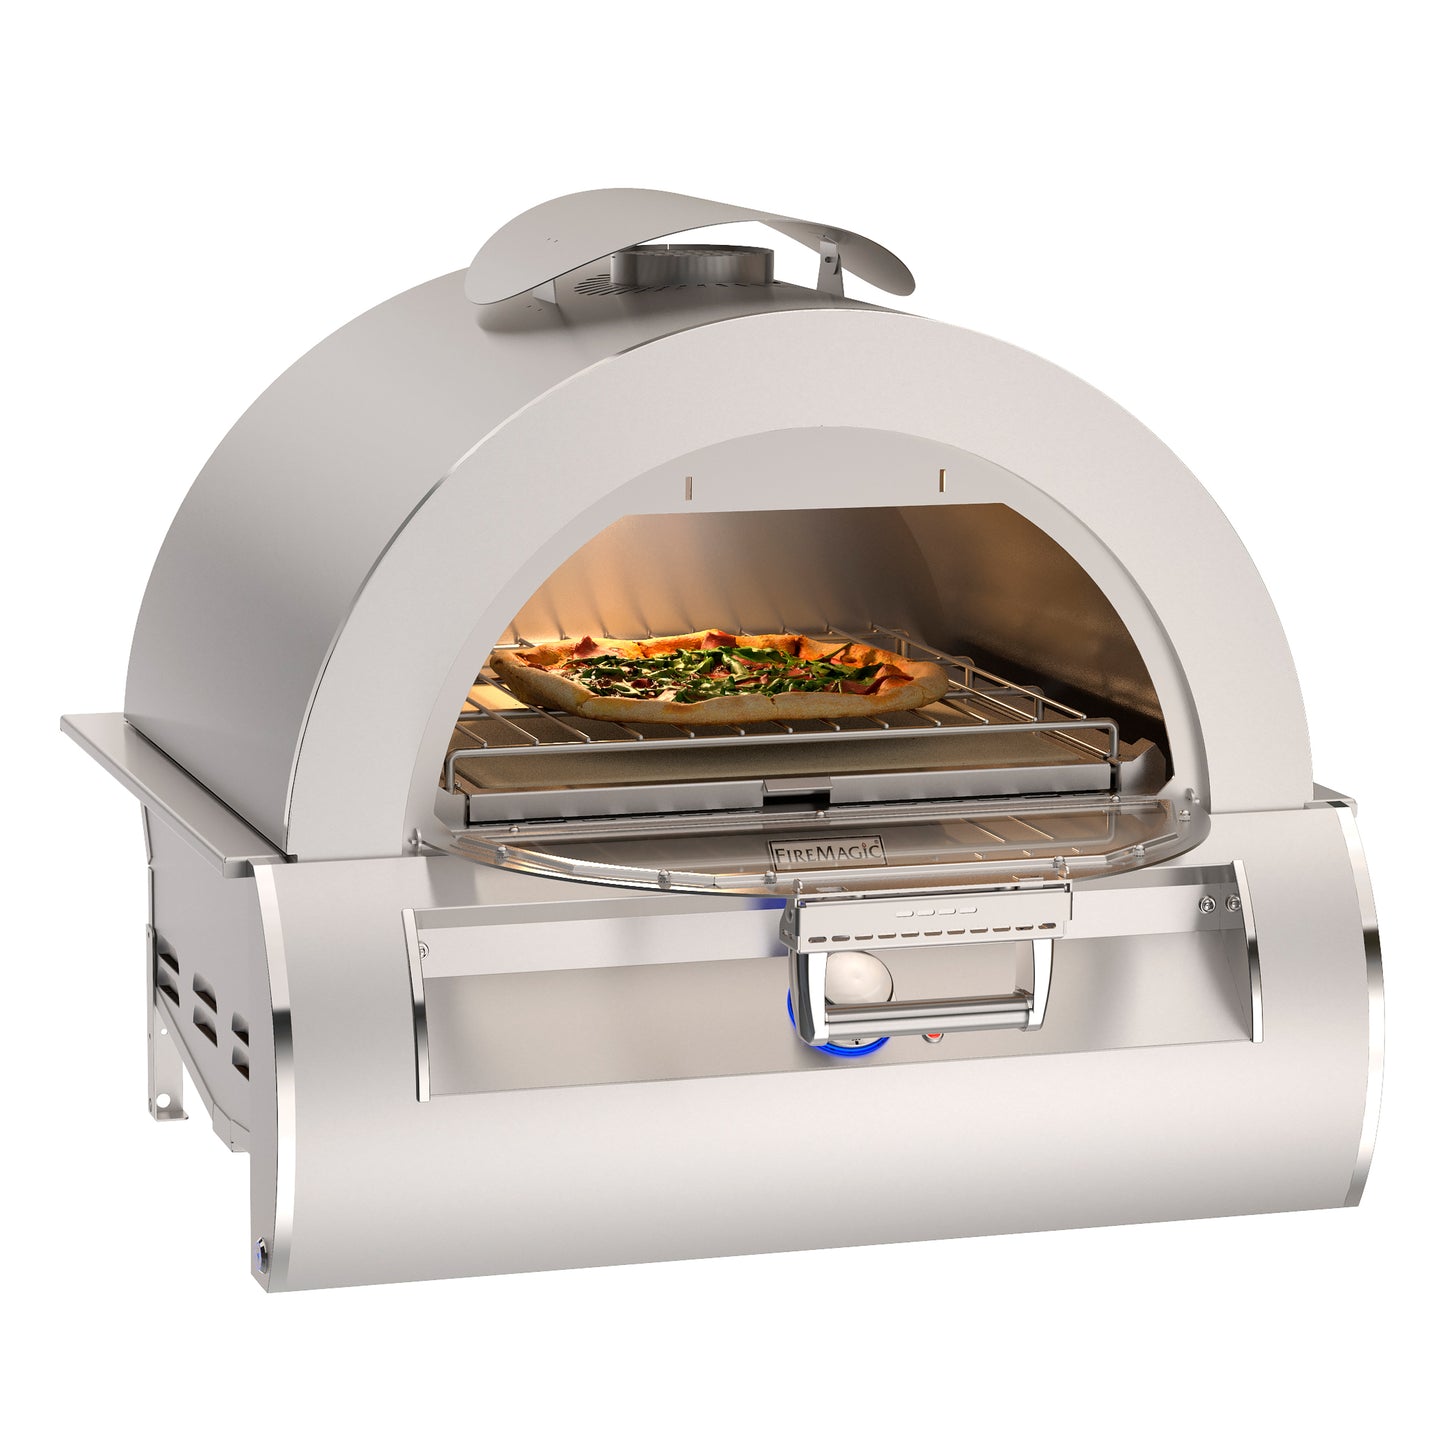 FireMagic 30" Gas Pizza Oven 5600